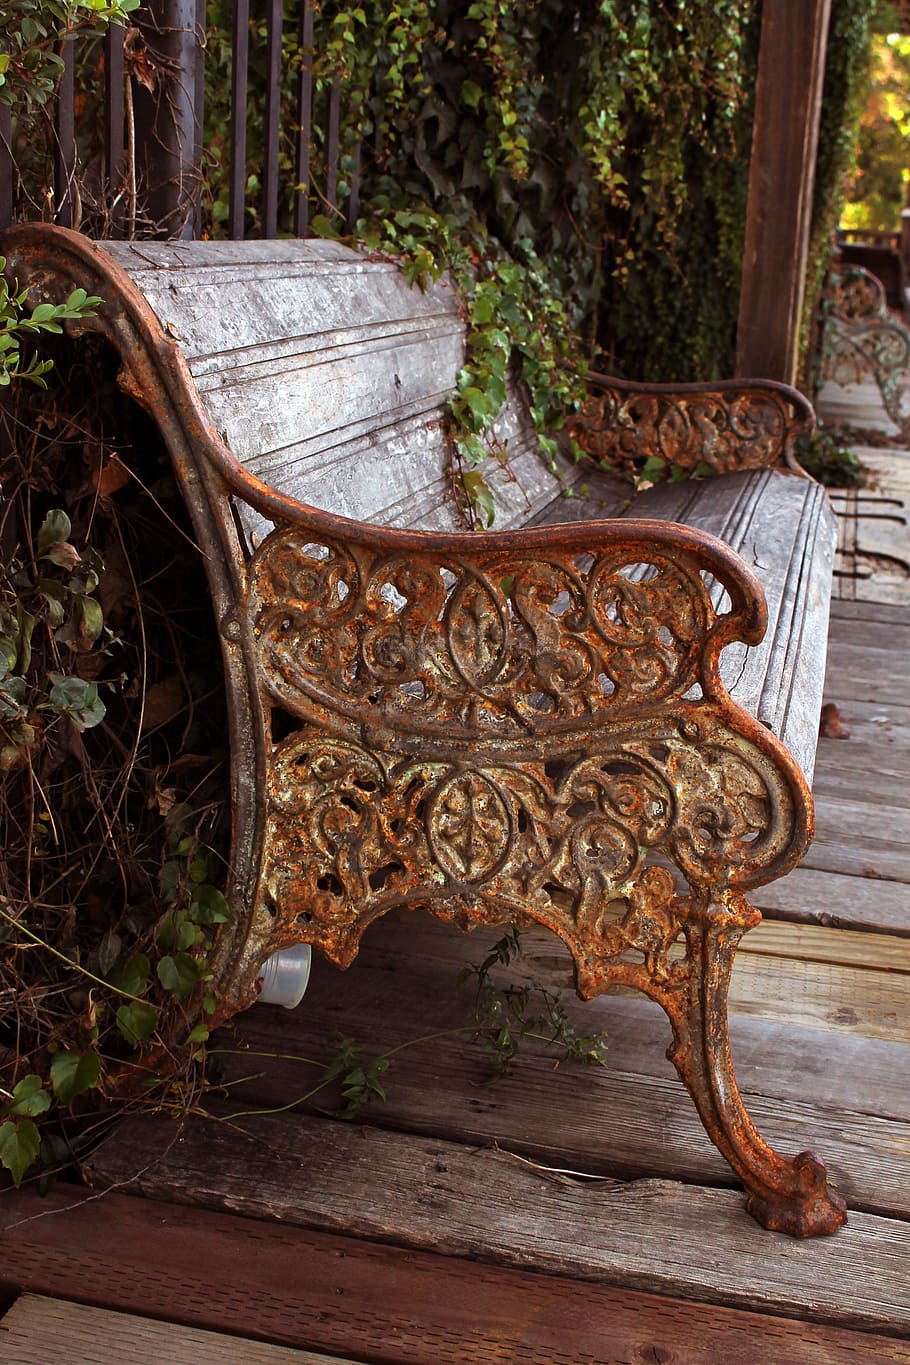 bench, rustic, antique, boardwalk, storefront, ivy, fence, day, wood - material, plant